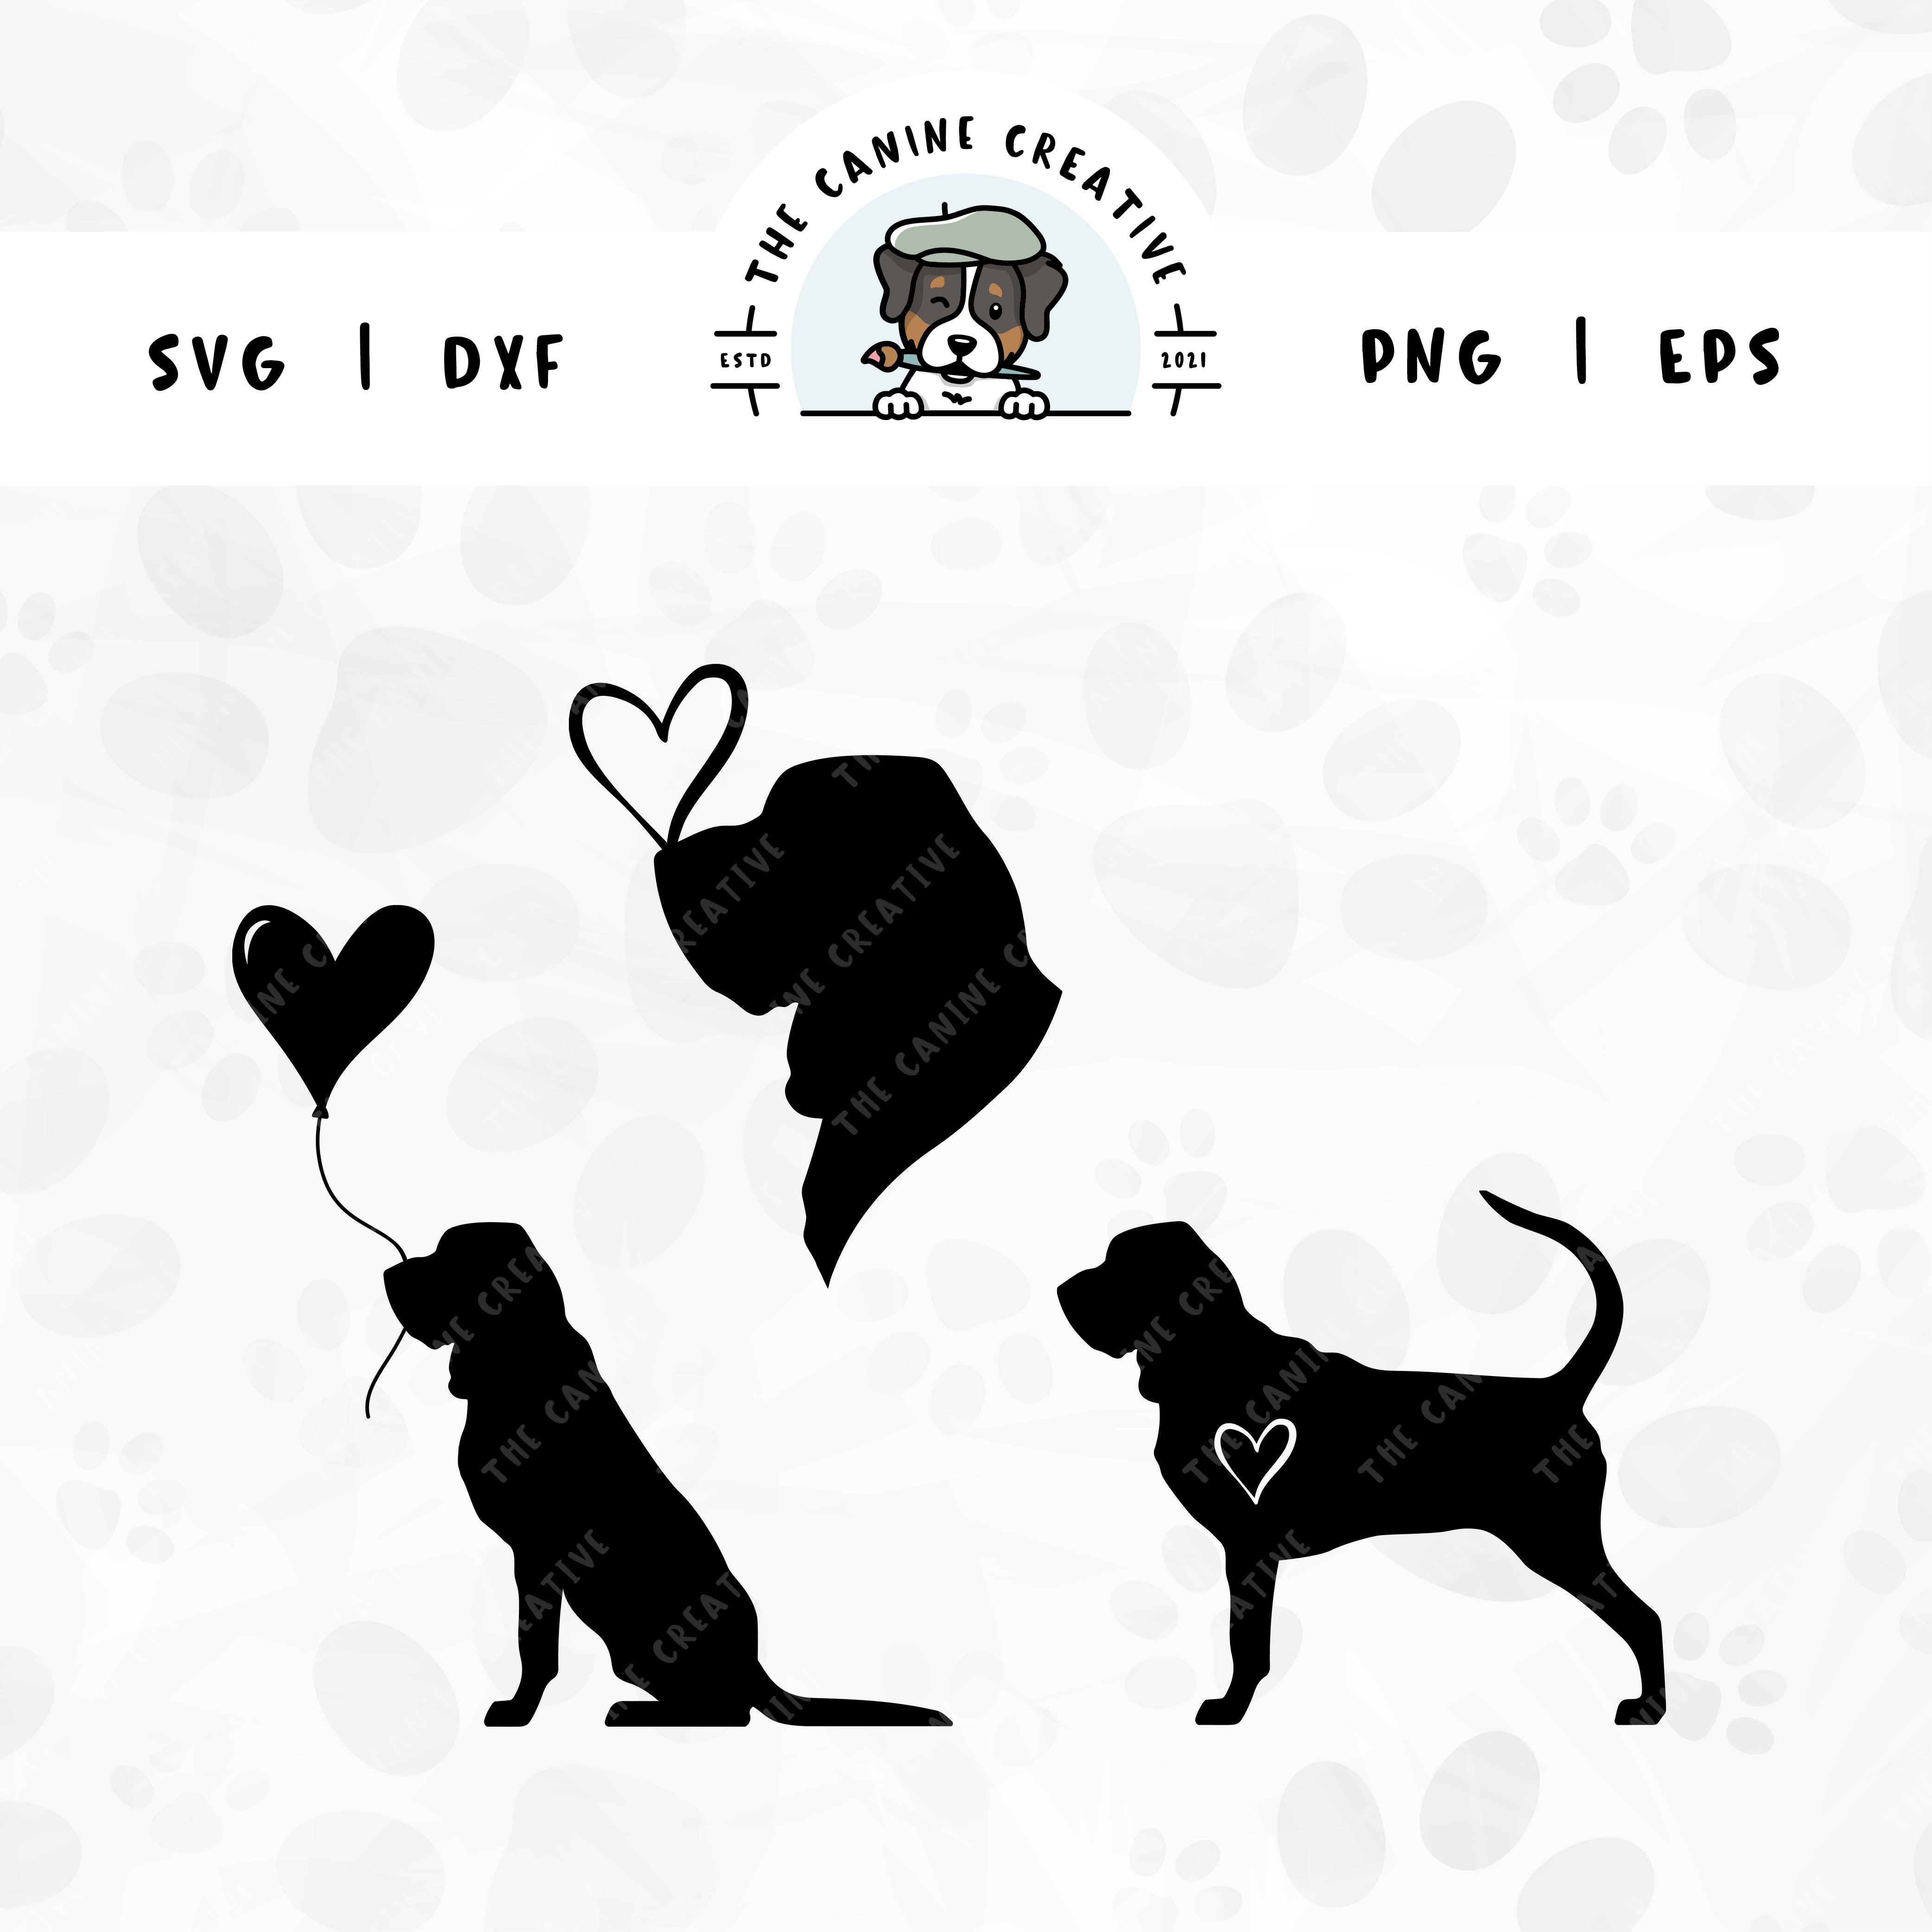 This 3-pack Bloodhound silhouette bundle features a head portrait of a dog with a heart perched atop it’s nose, a sitting dog holding a heart balloon, and a standing profile of a dog with a heart inset. File formats include: SVG, DXF, PNG, and EPS.